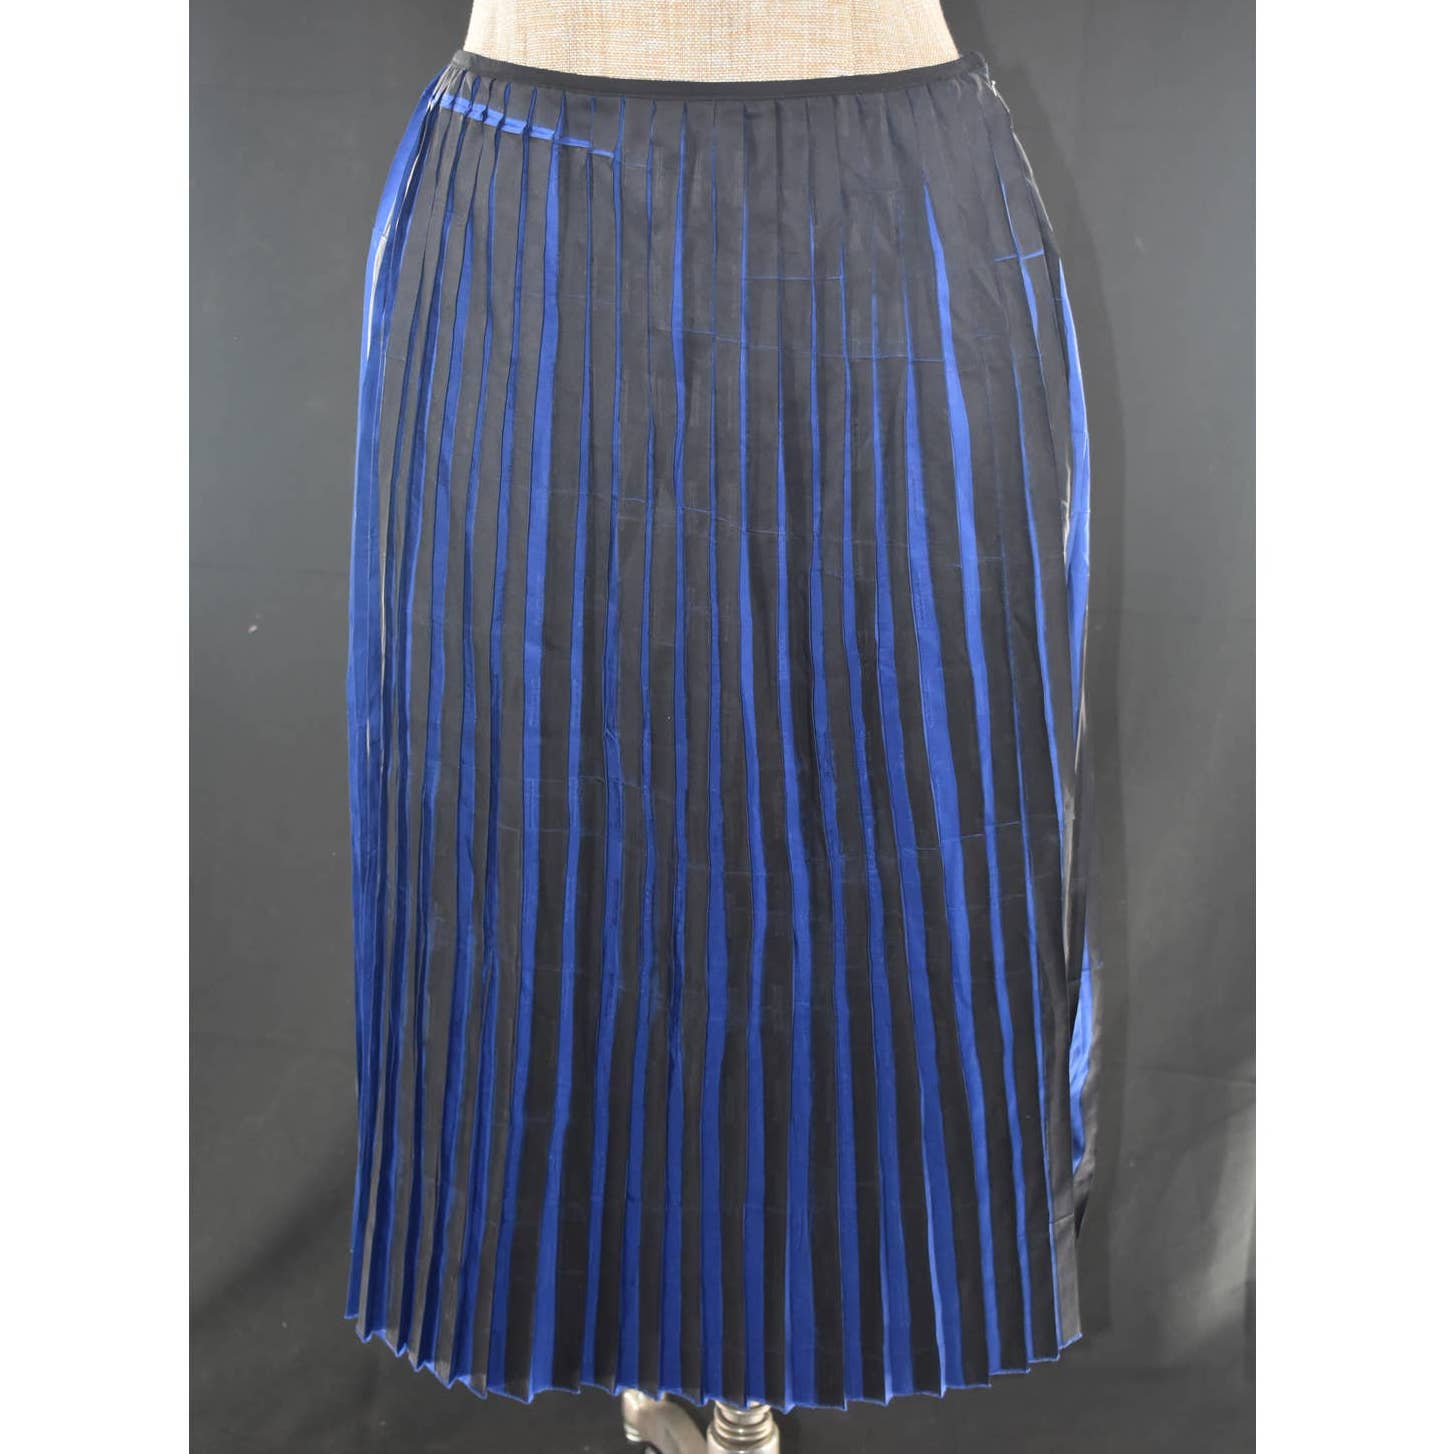 Costura Concept Store Pleated Blue and Black Midi Skirt- S